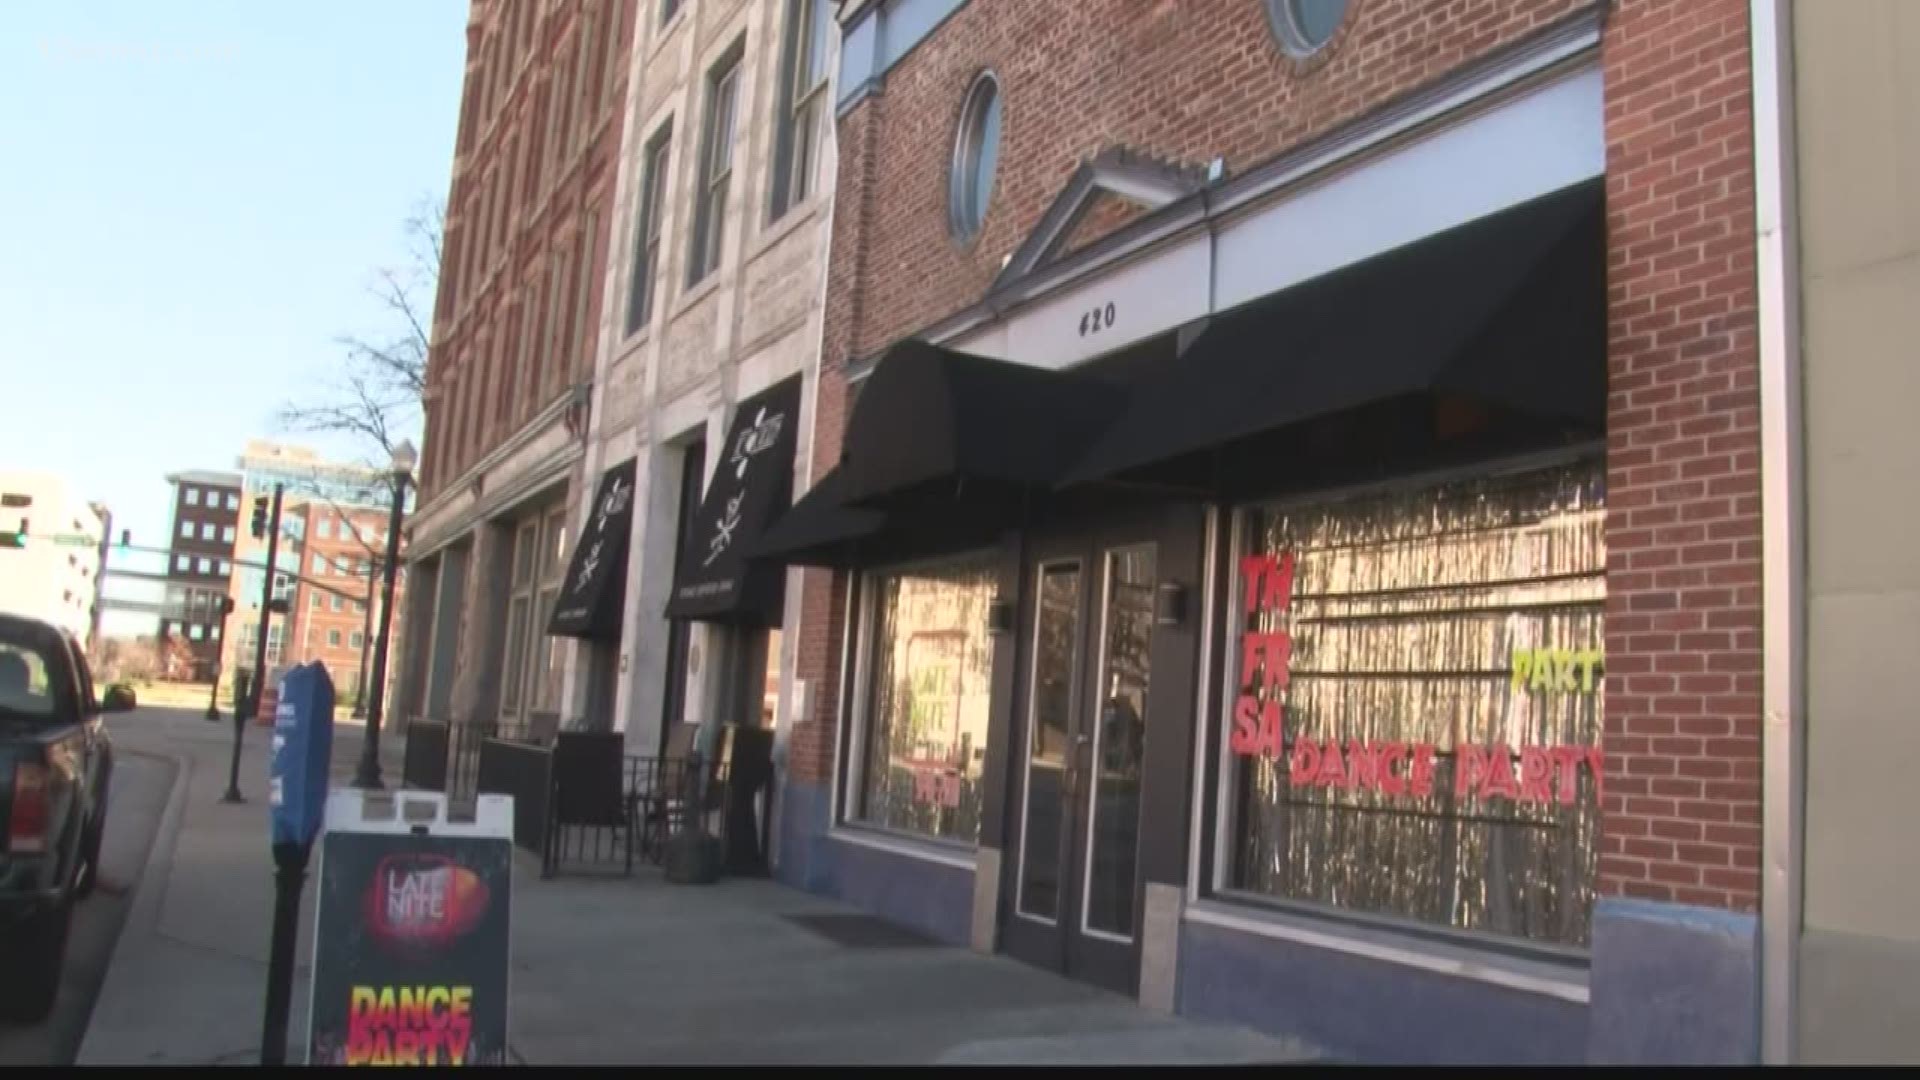 Downtown Macon's nightlife scene is attracting more people to the city, and business owners say the holiday season has a lot to do with it.